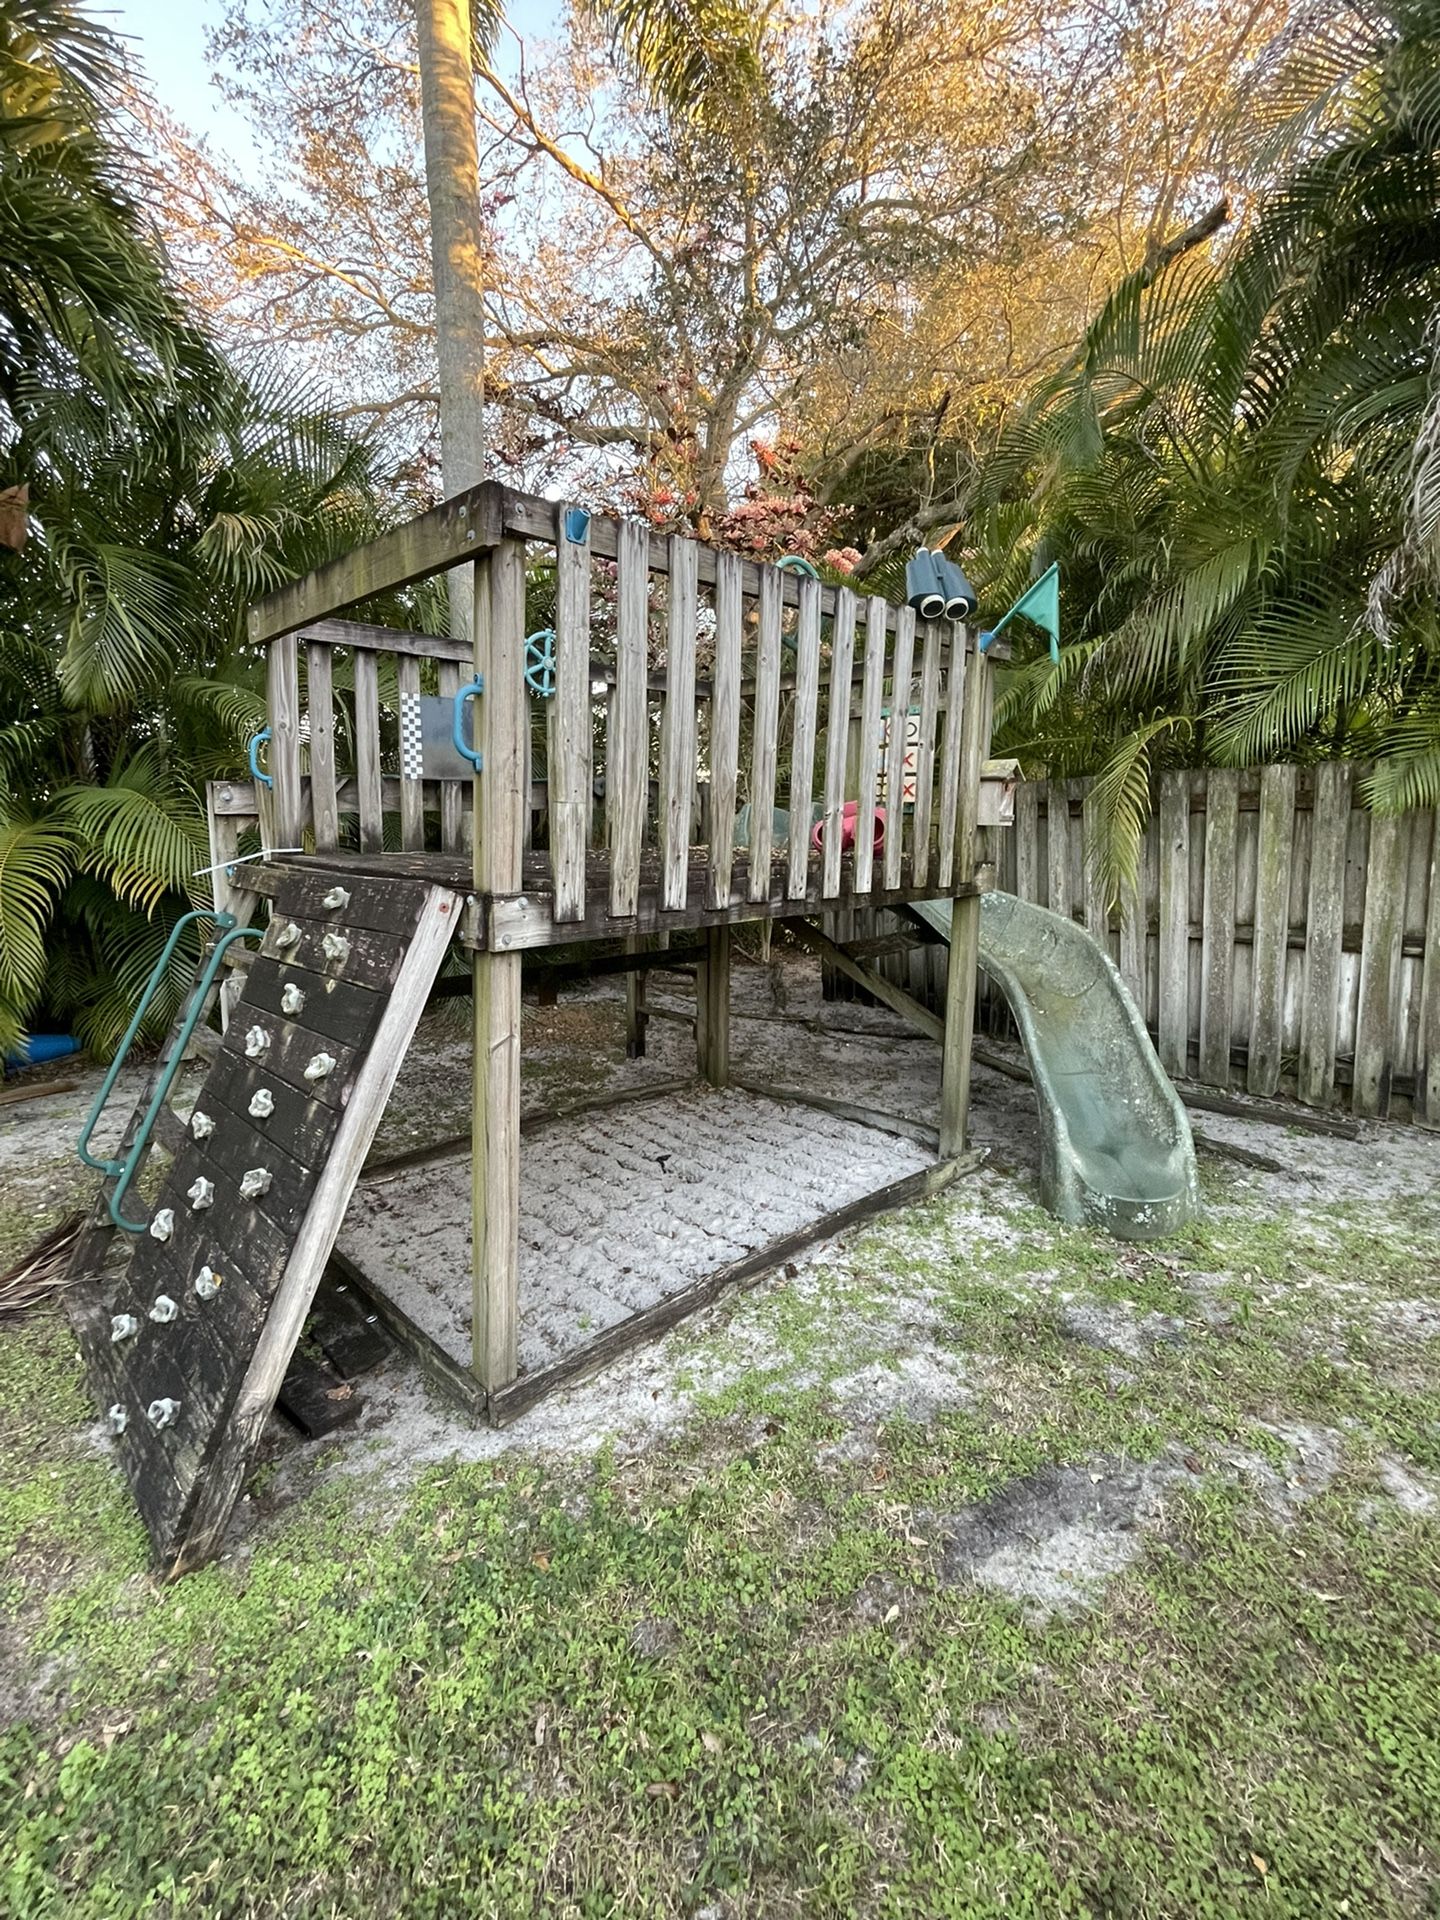 Free Swing Set, Fort, and Monkey Bars